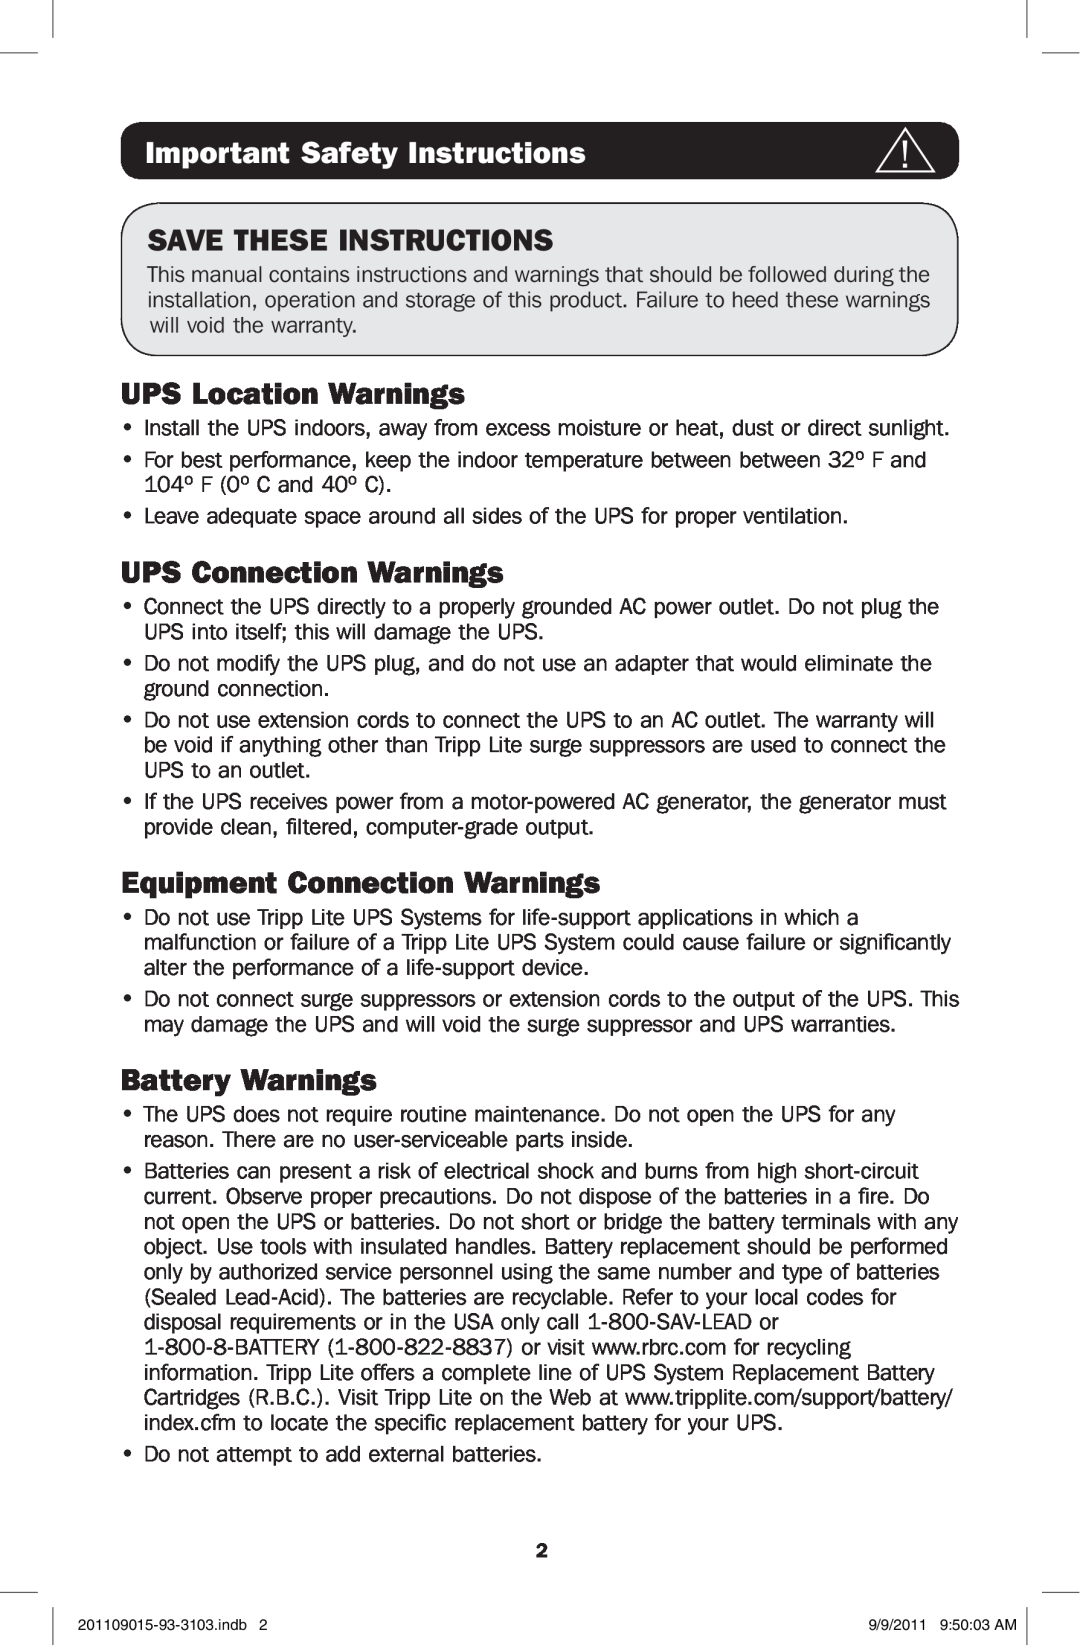 Tripp Lite OMNIVS1500 Important Safety Instructions, Save These Instructions, UPS Location Warnings, Battery Warnings 